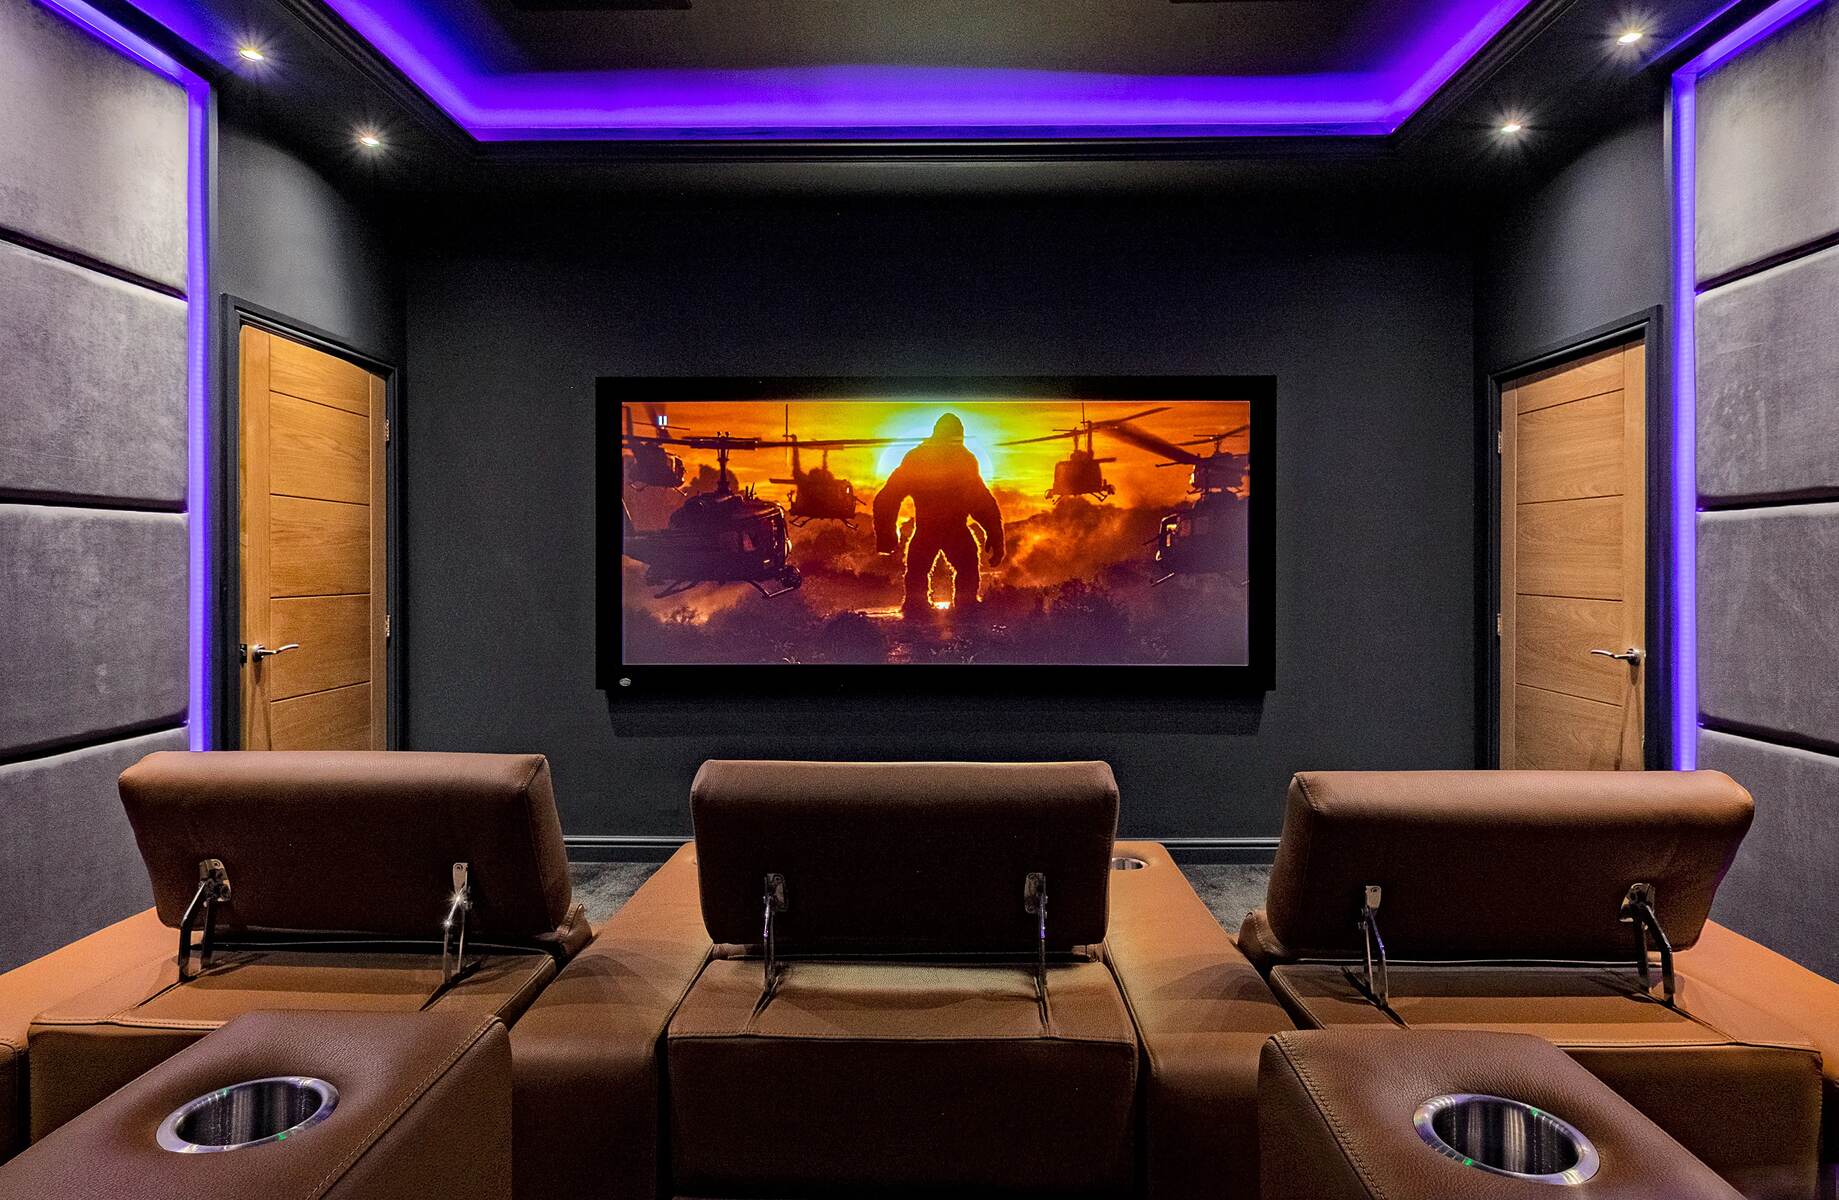 How To Setup A Home Theater System With Projector